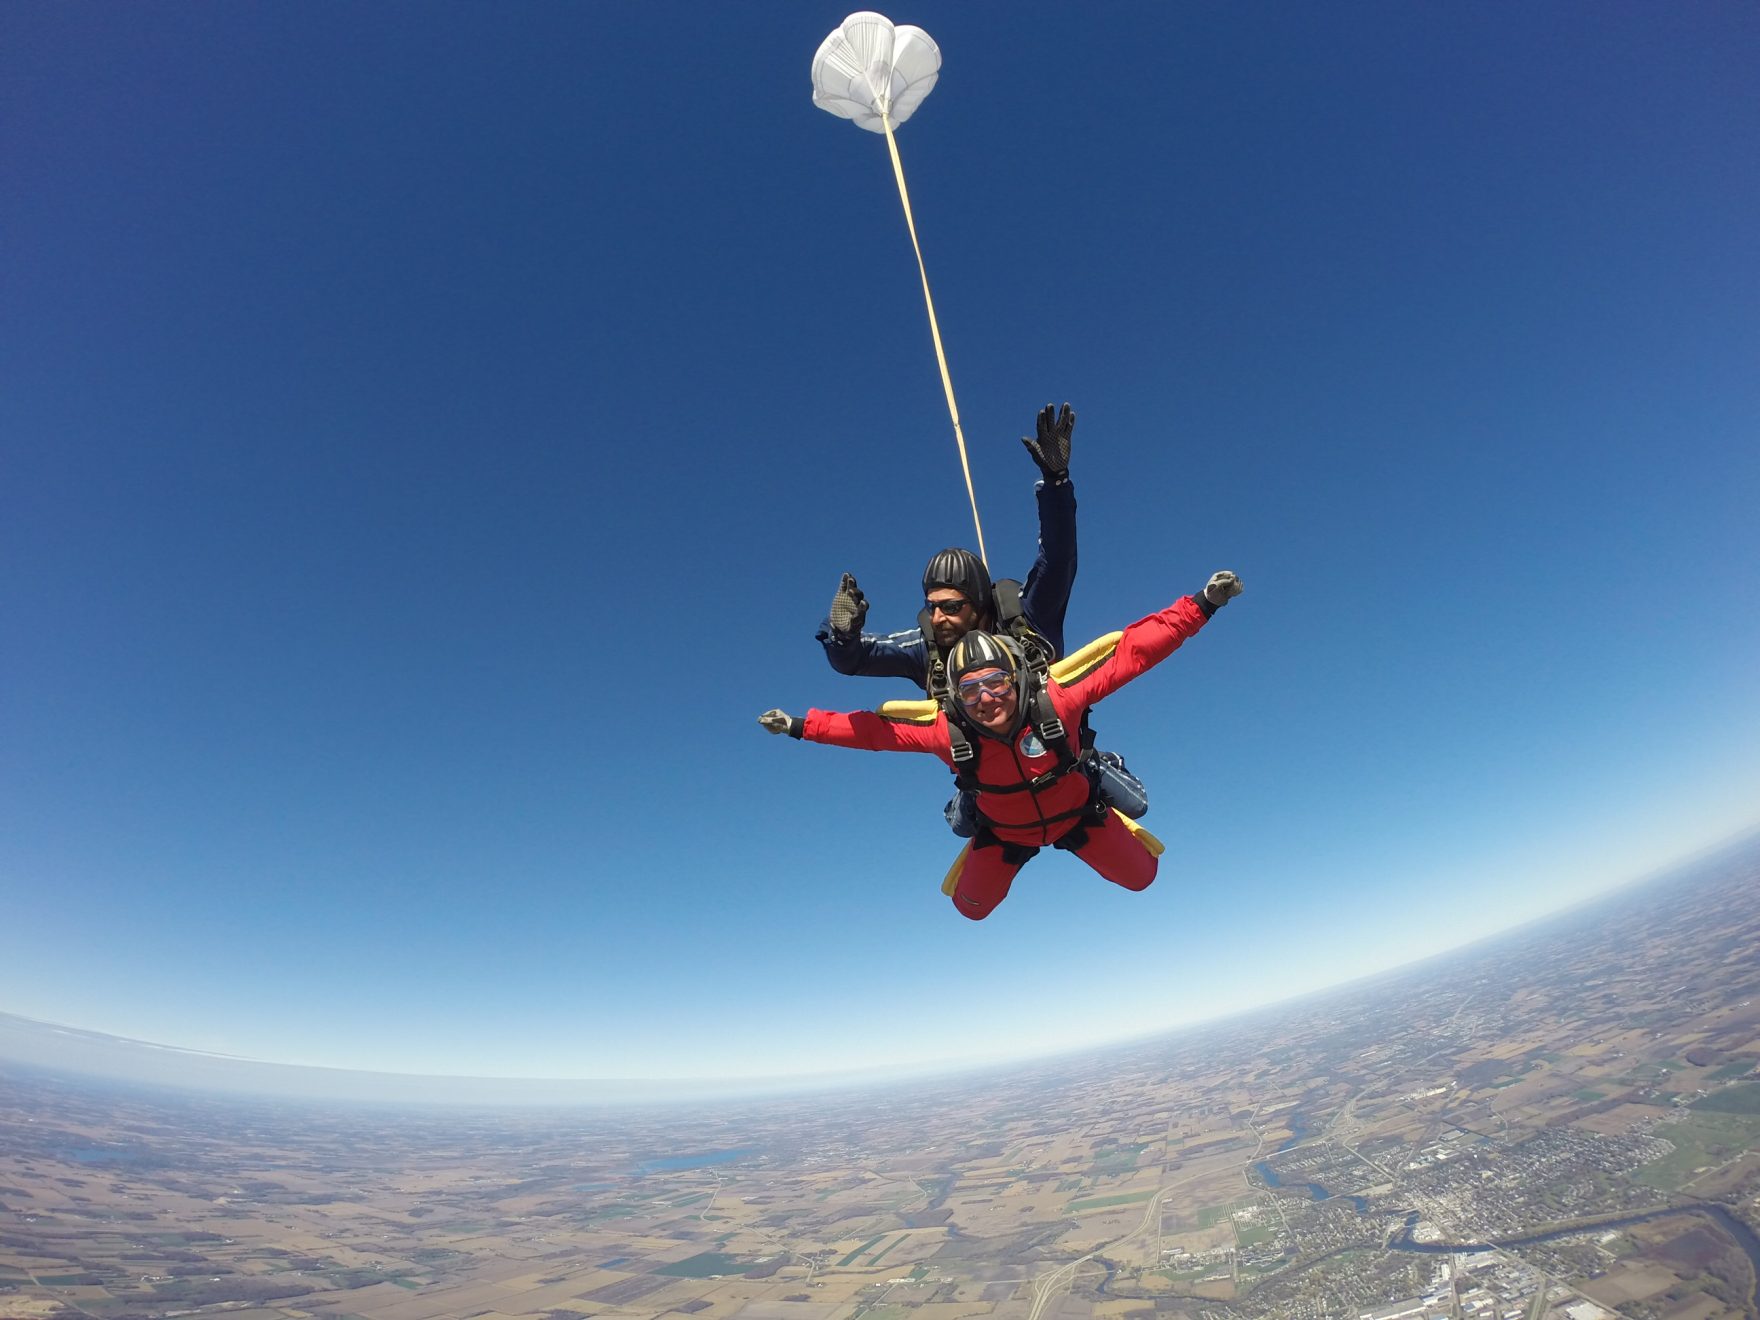 Skydiving Requirements Weight Limits, Height, Age Wisconsin